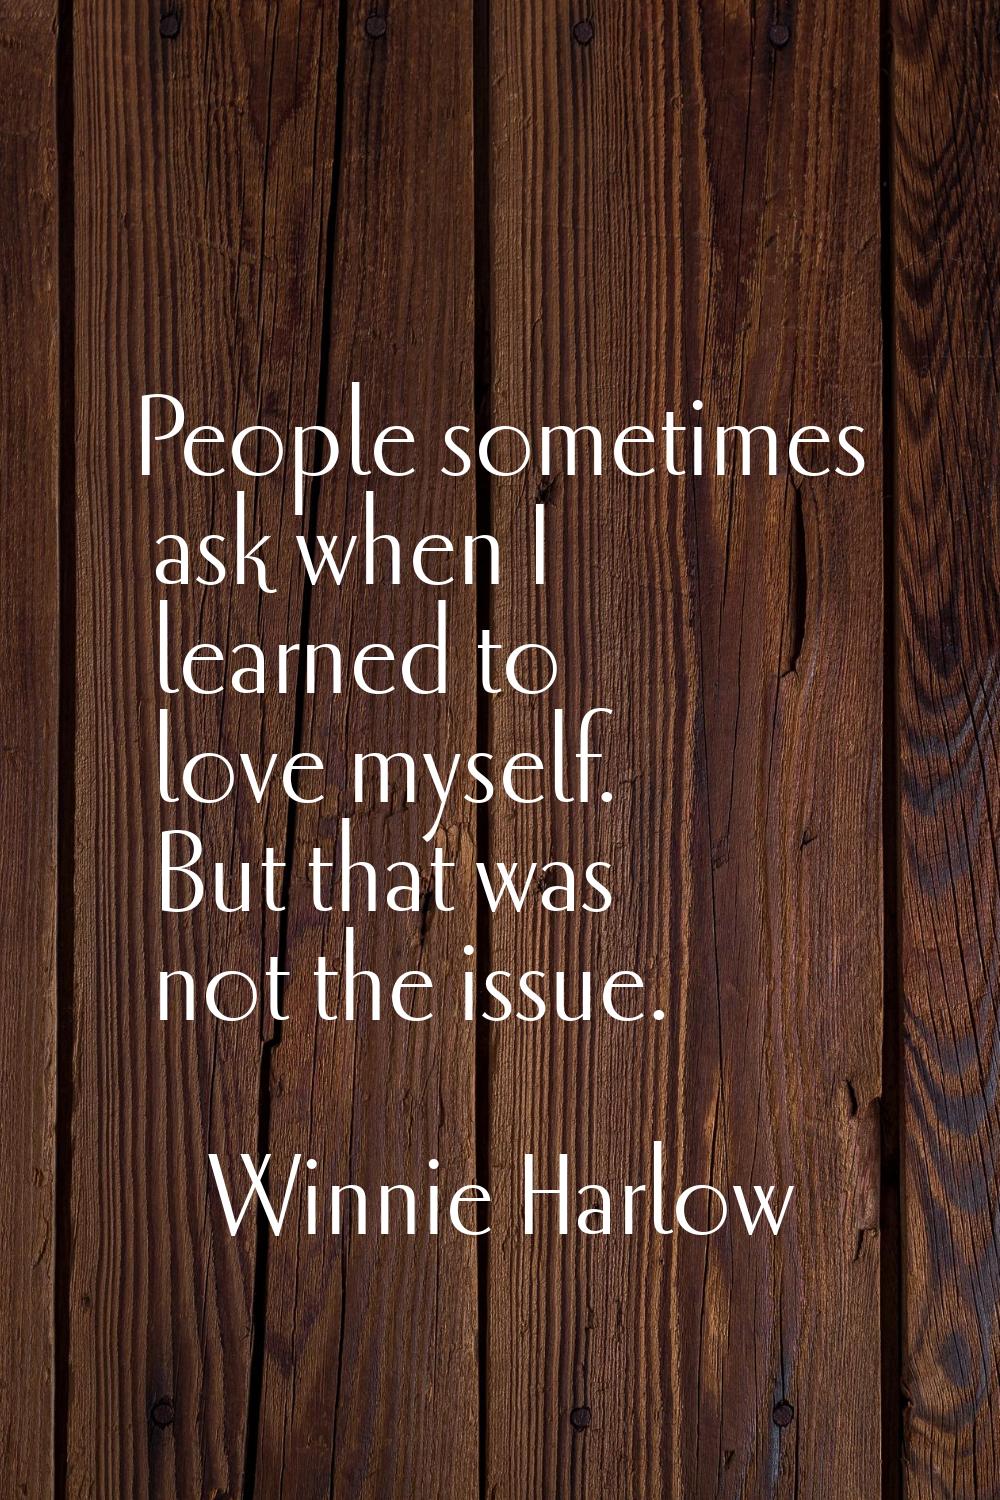 People sometimes ask when I learned to love myself. But that was not the issue.